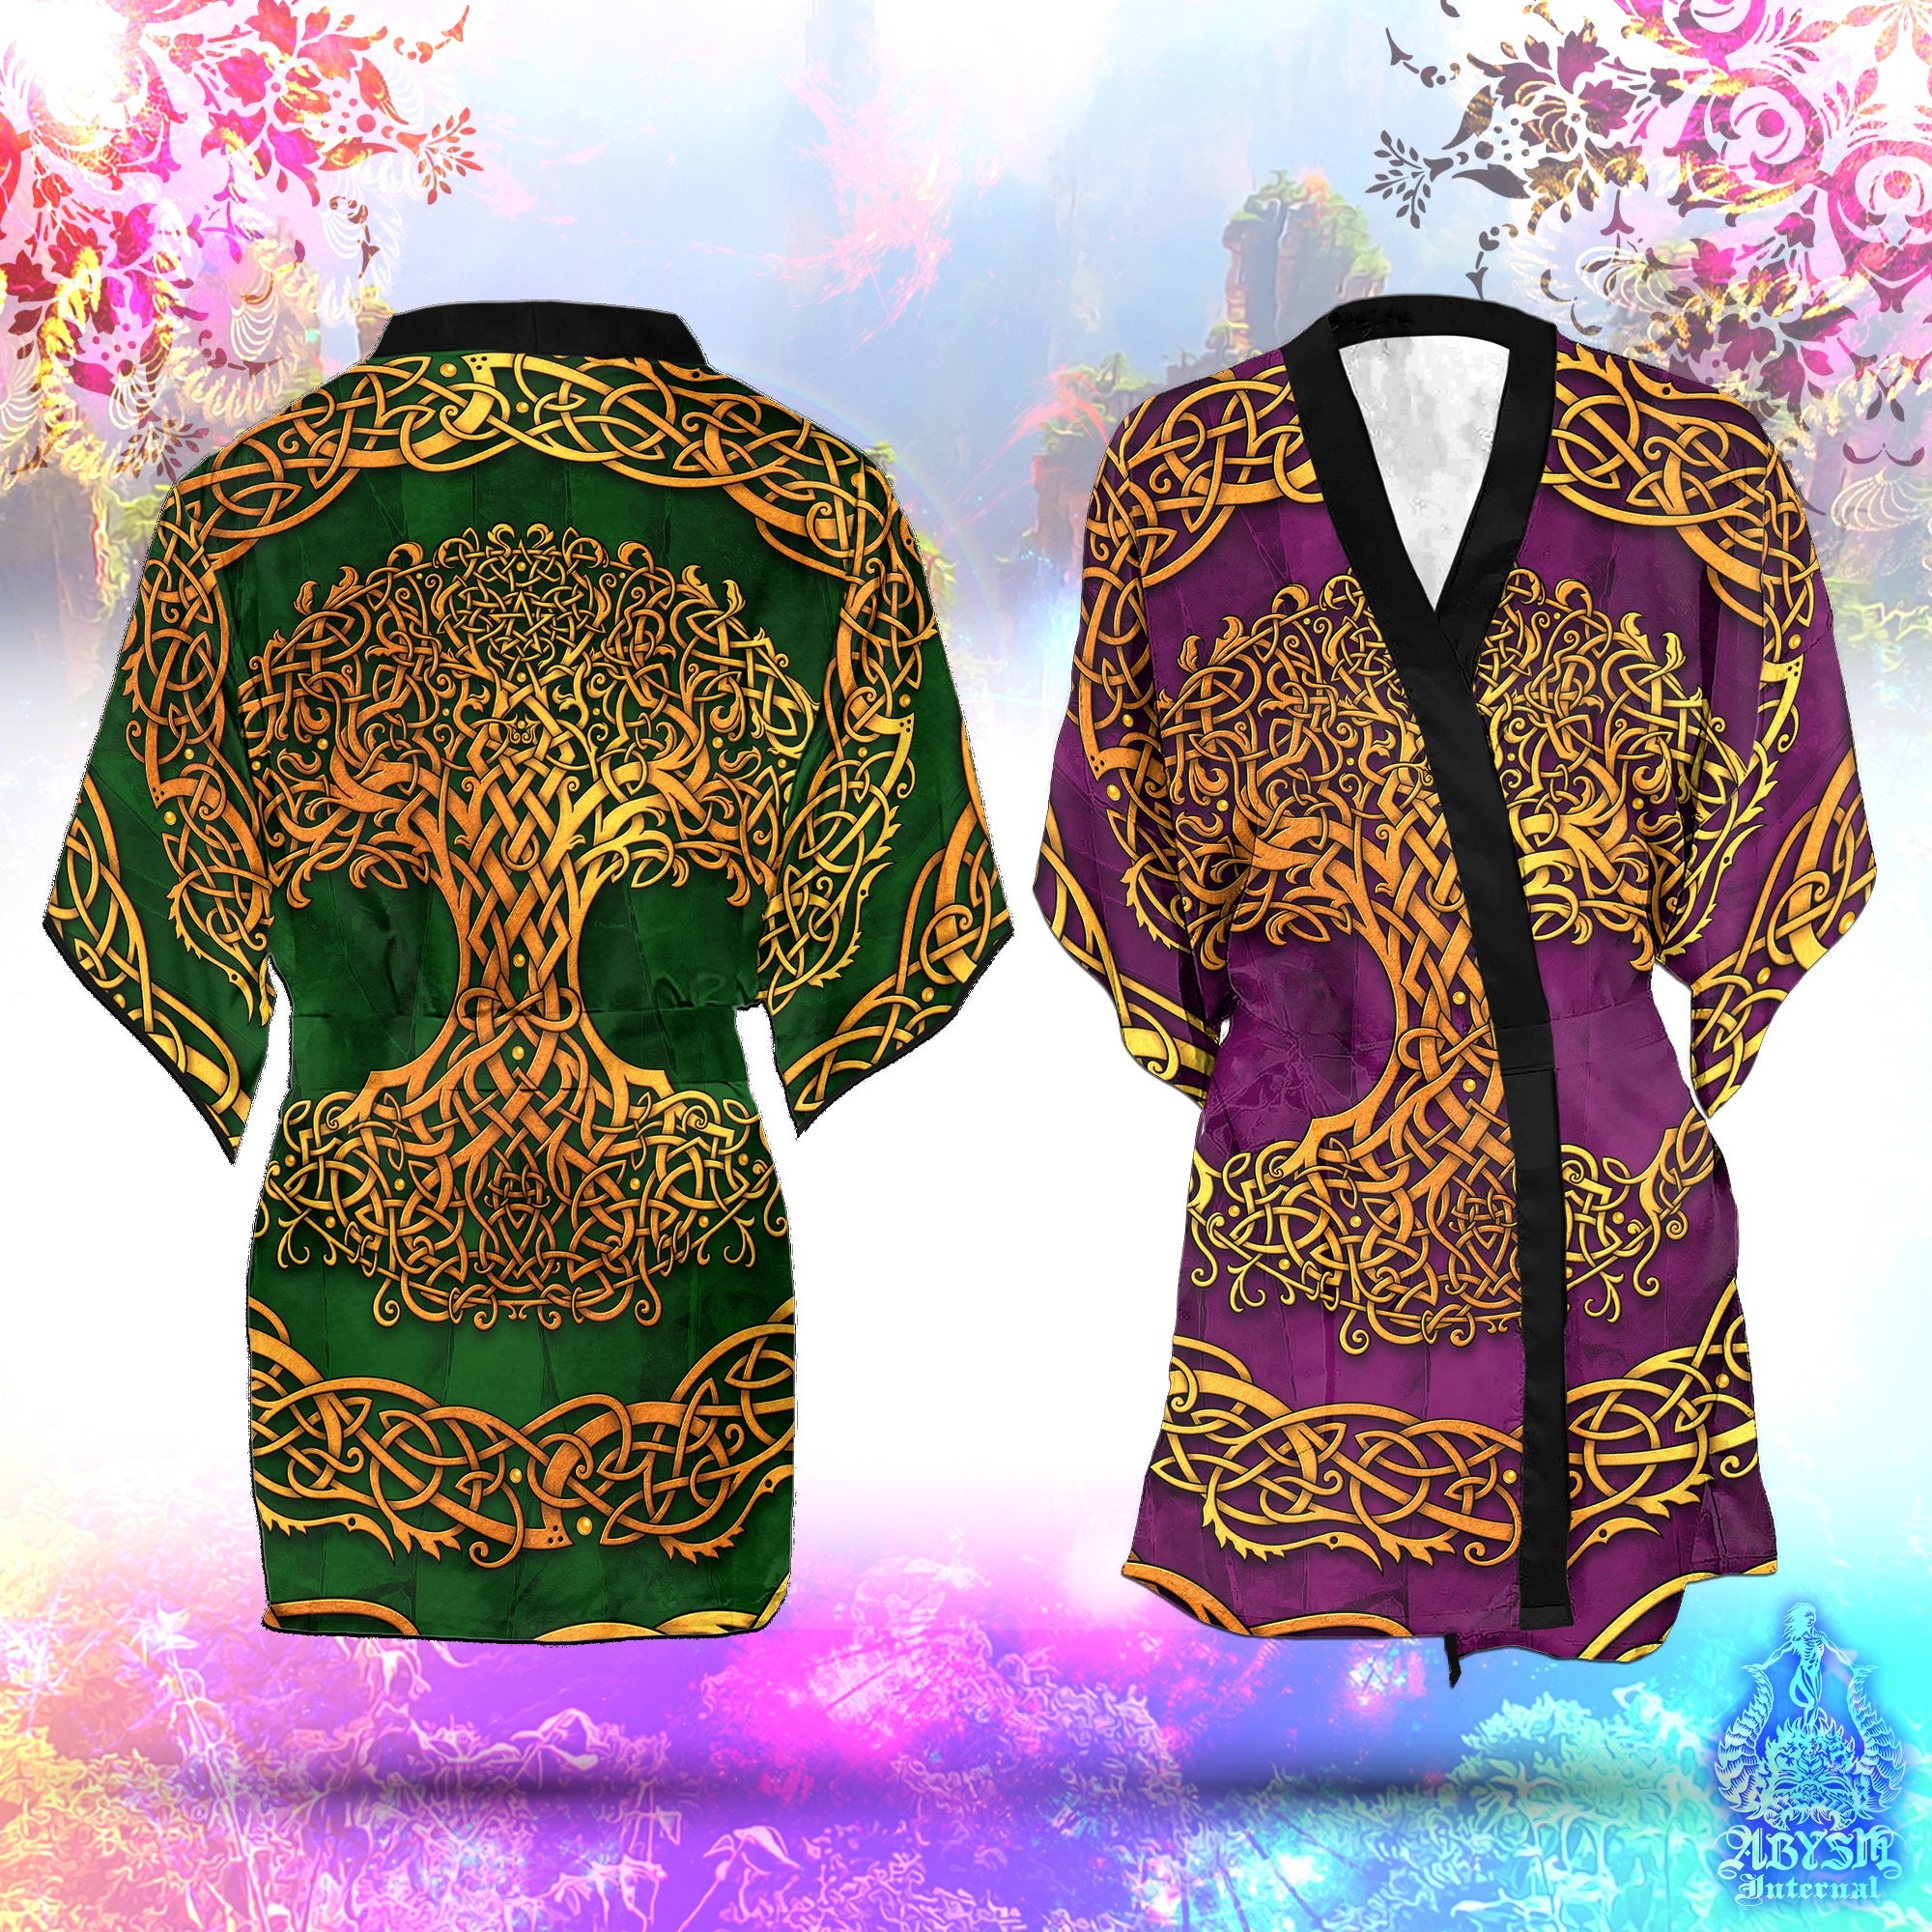 Hippie Short Kimono Robe, Beach Party Outfit, Celtic Tree of Life Coverup, Wicca Summer Festival, Witchy Indie Clothing, Unisex - Gold and Colors: Green, Purple, Black - Abysm Internal